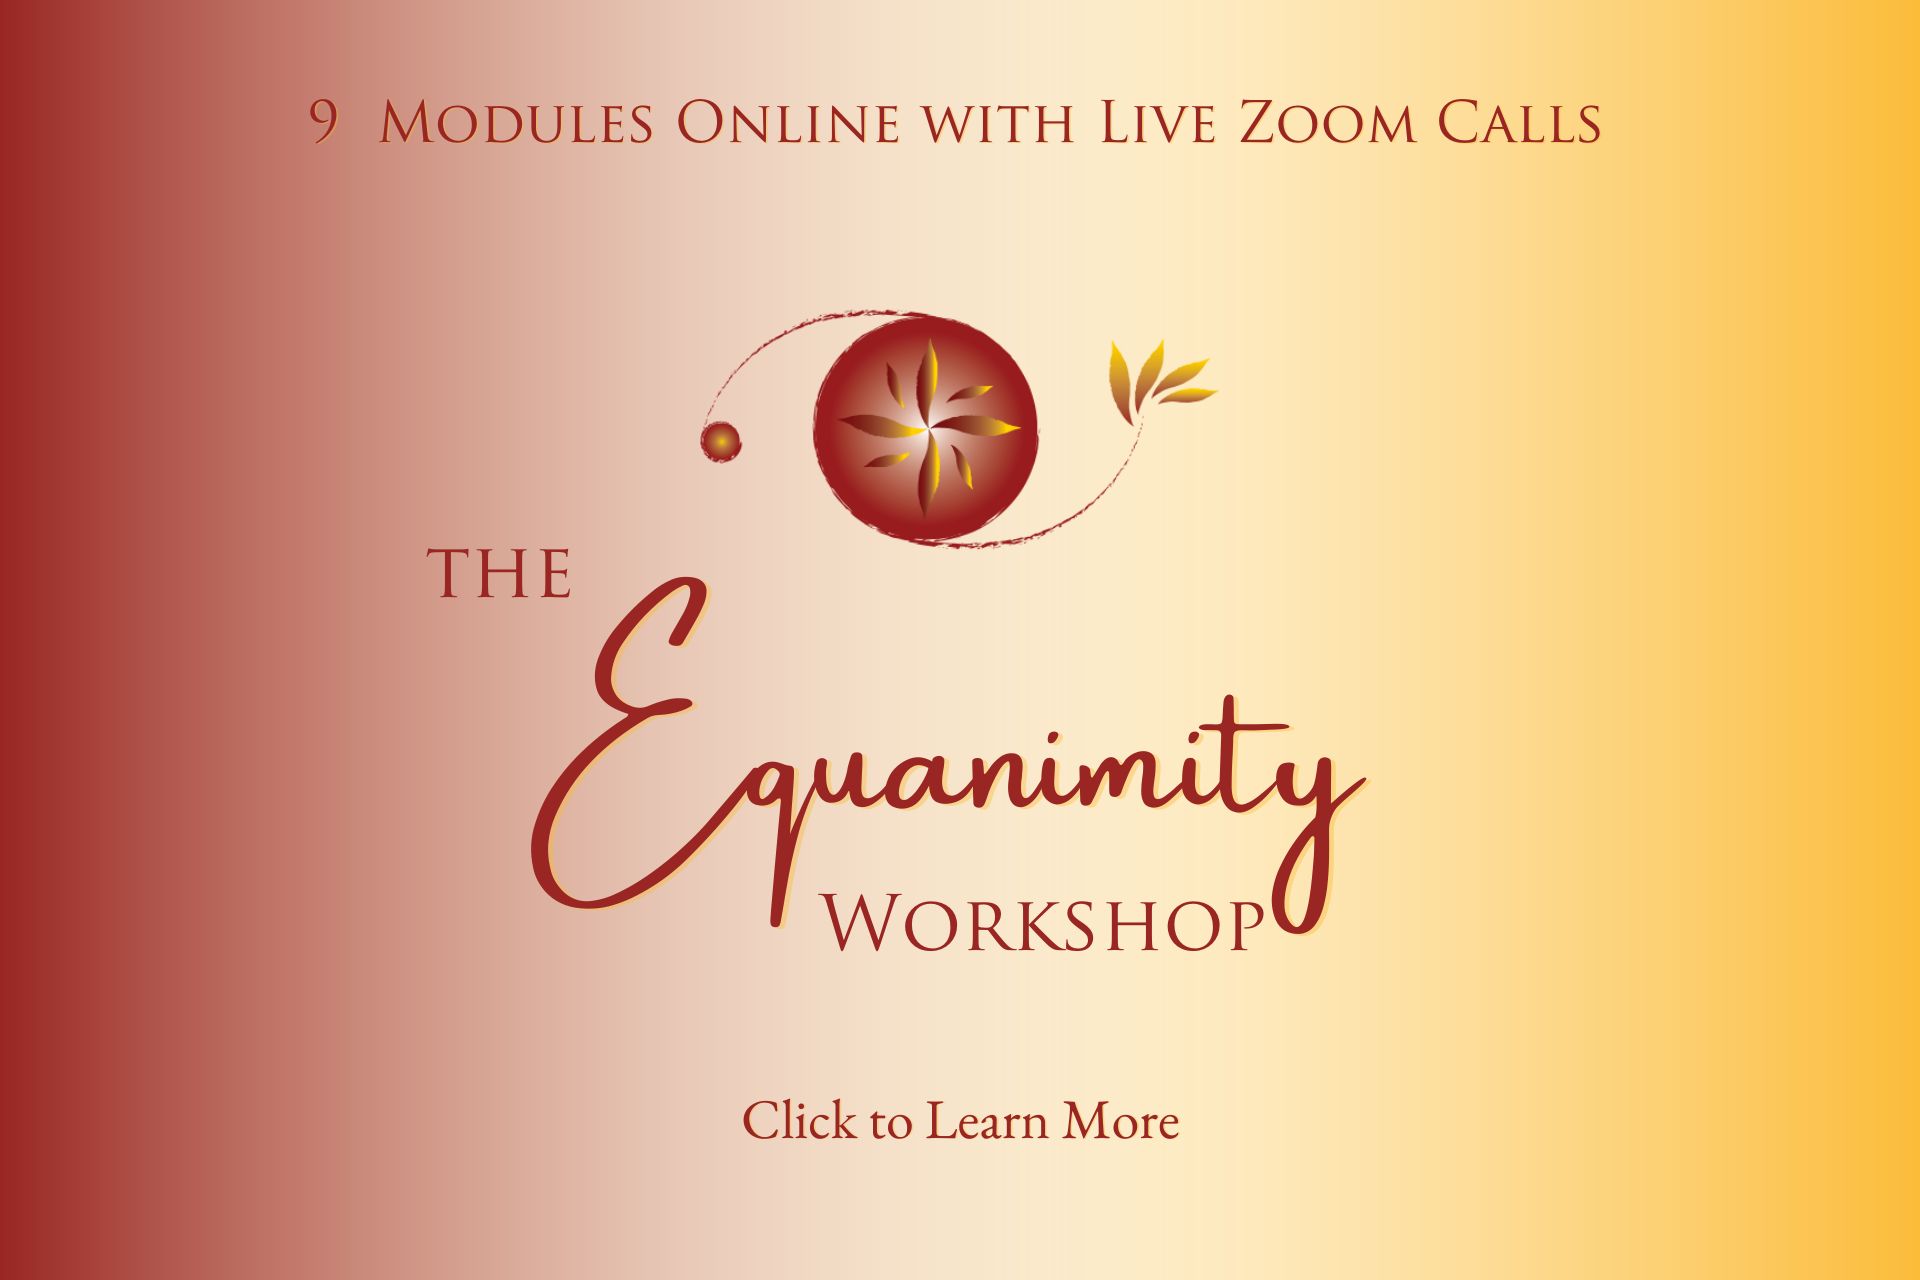 the Equanimity Workshop